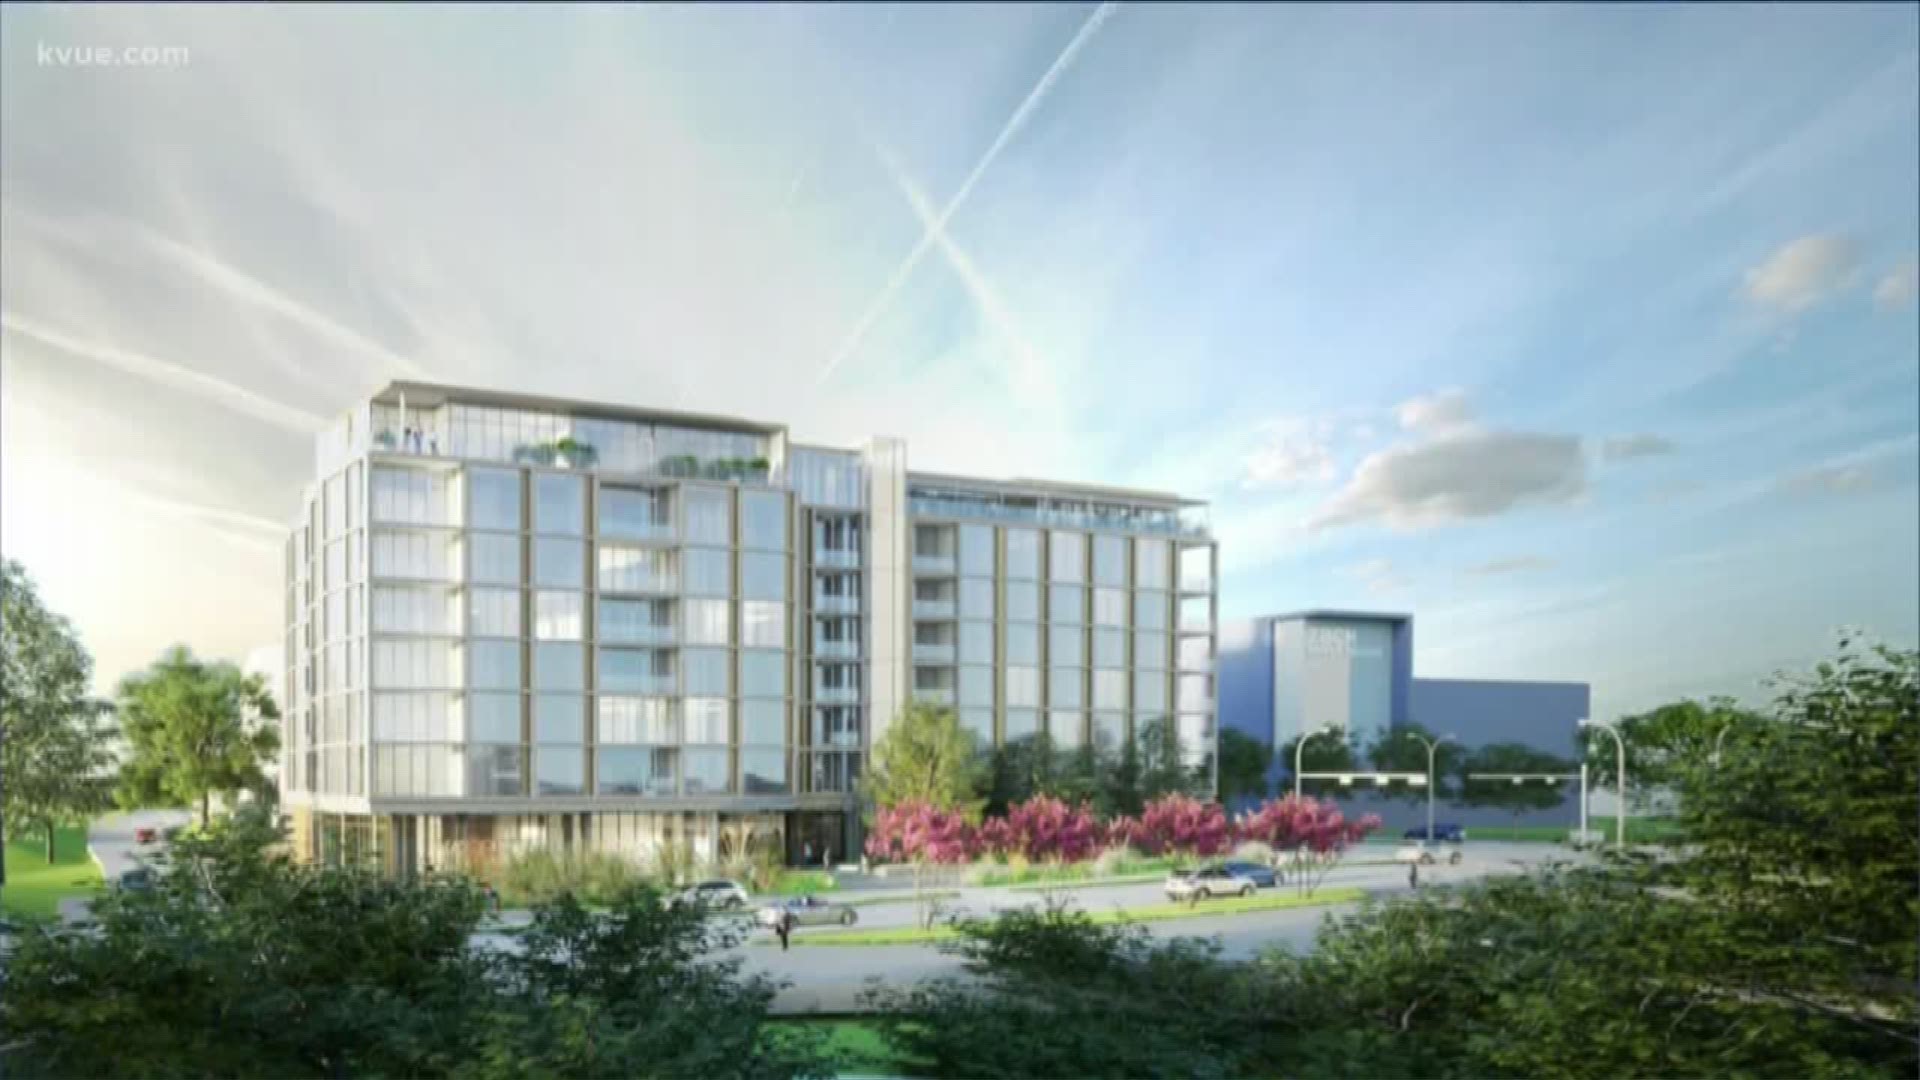 A new eight-story building is coming to the shores of Lady Bird Lake.